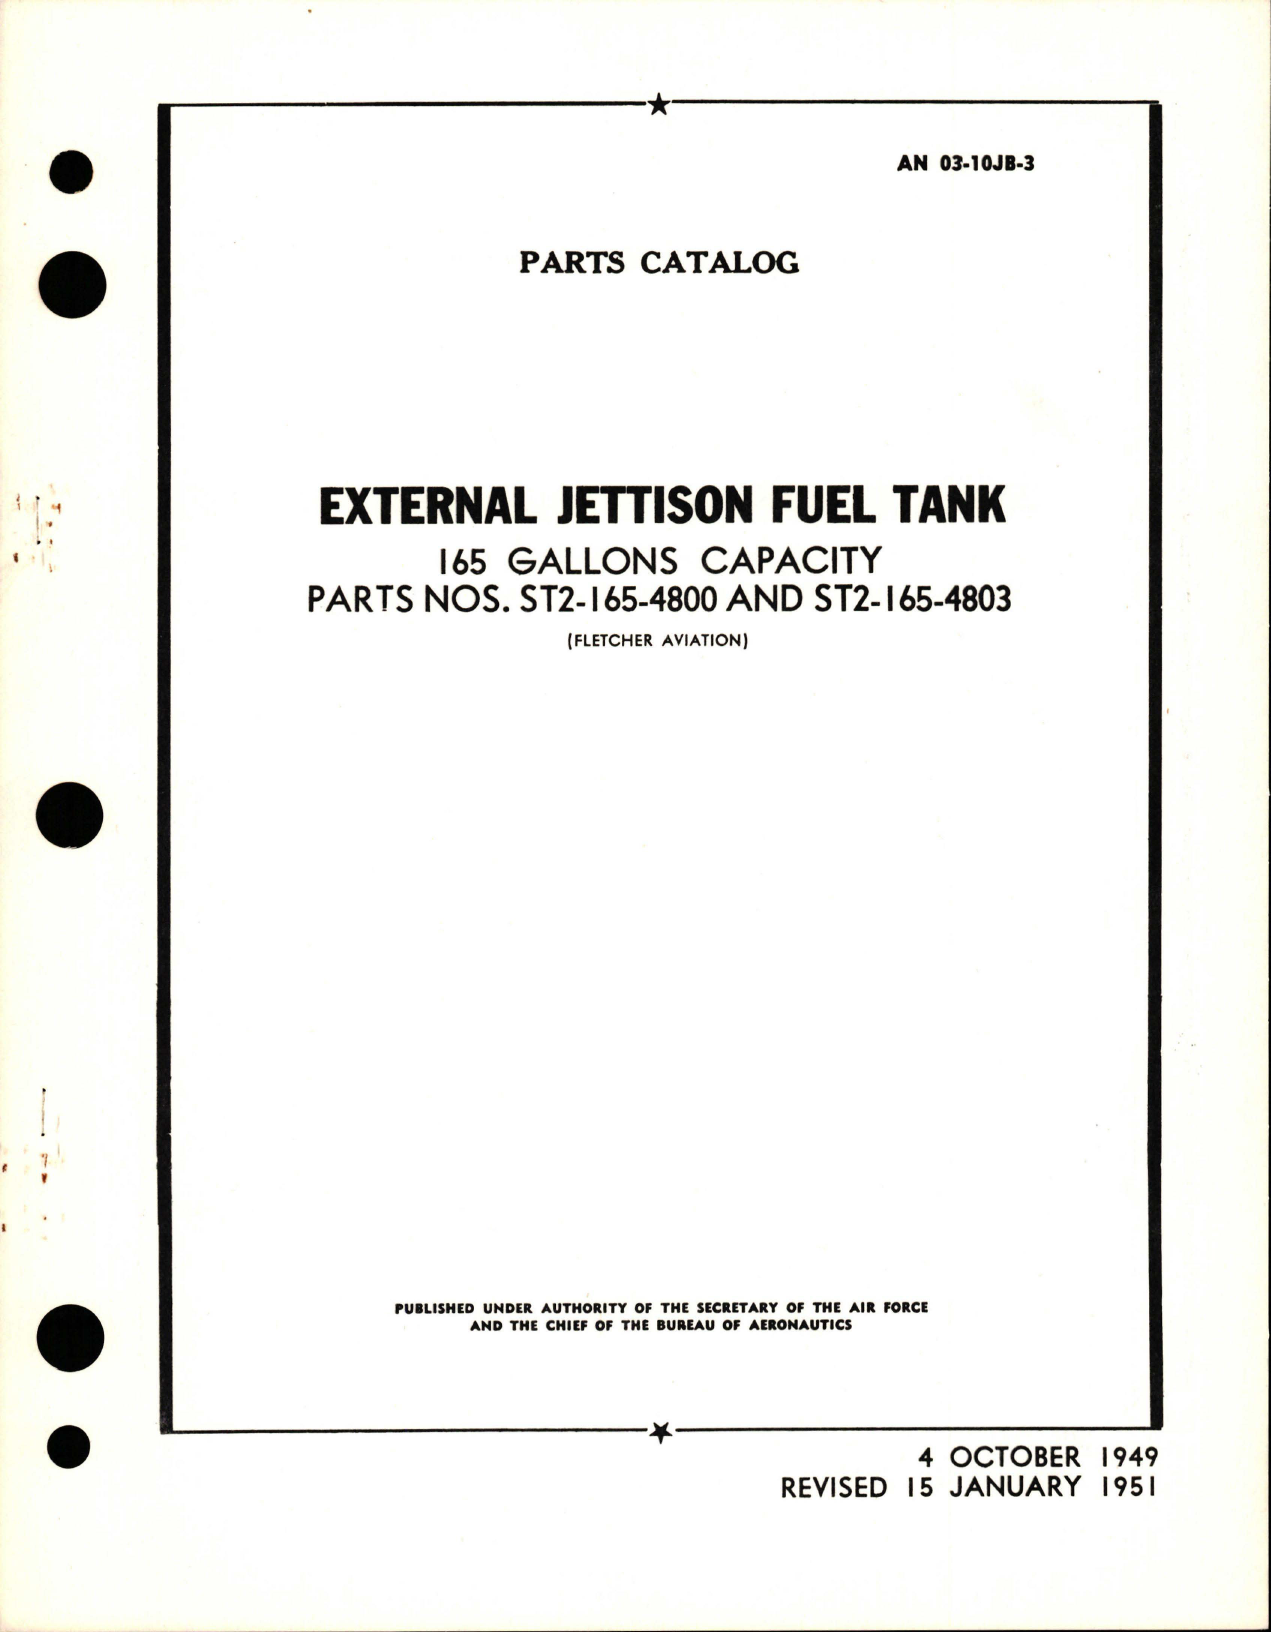 Sample page 1 from AirCorps Library document: Parts Catalog for External Jettison Fuel Tank - 165 Gal Capacity - Parts ST2-165-4800 and ST2-165-4803